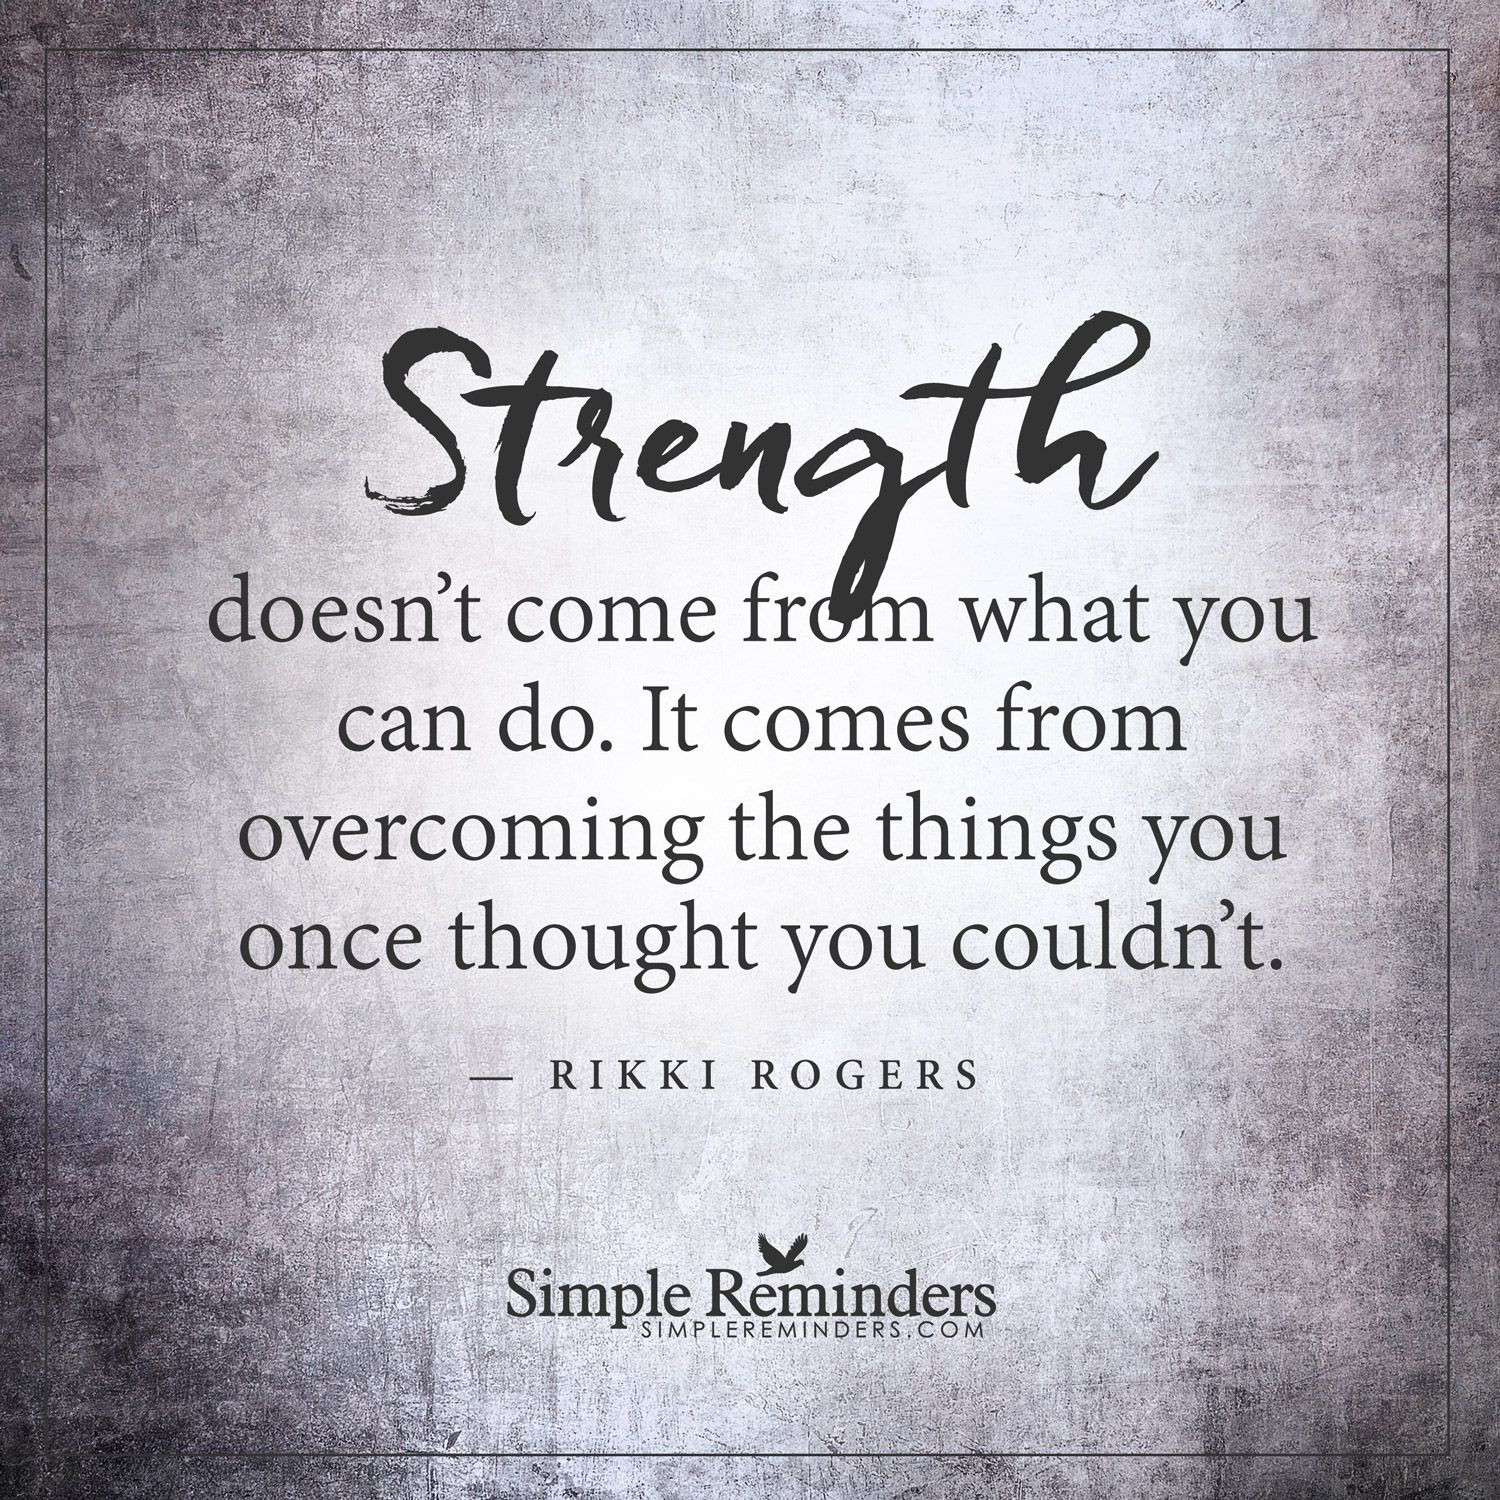 Quotes About Life And Strength
 Over ing things Strength doesn t e from what you can